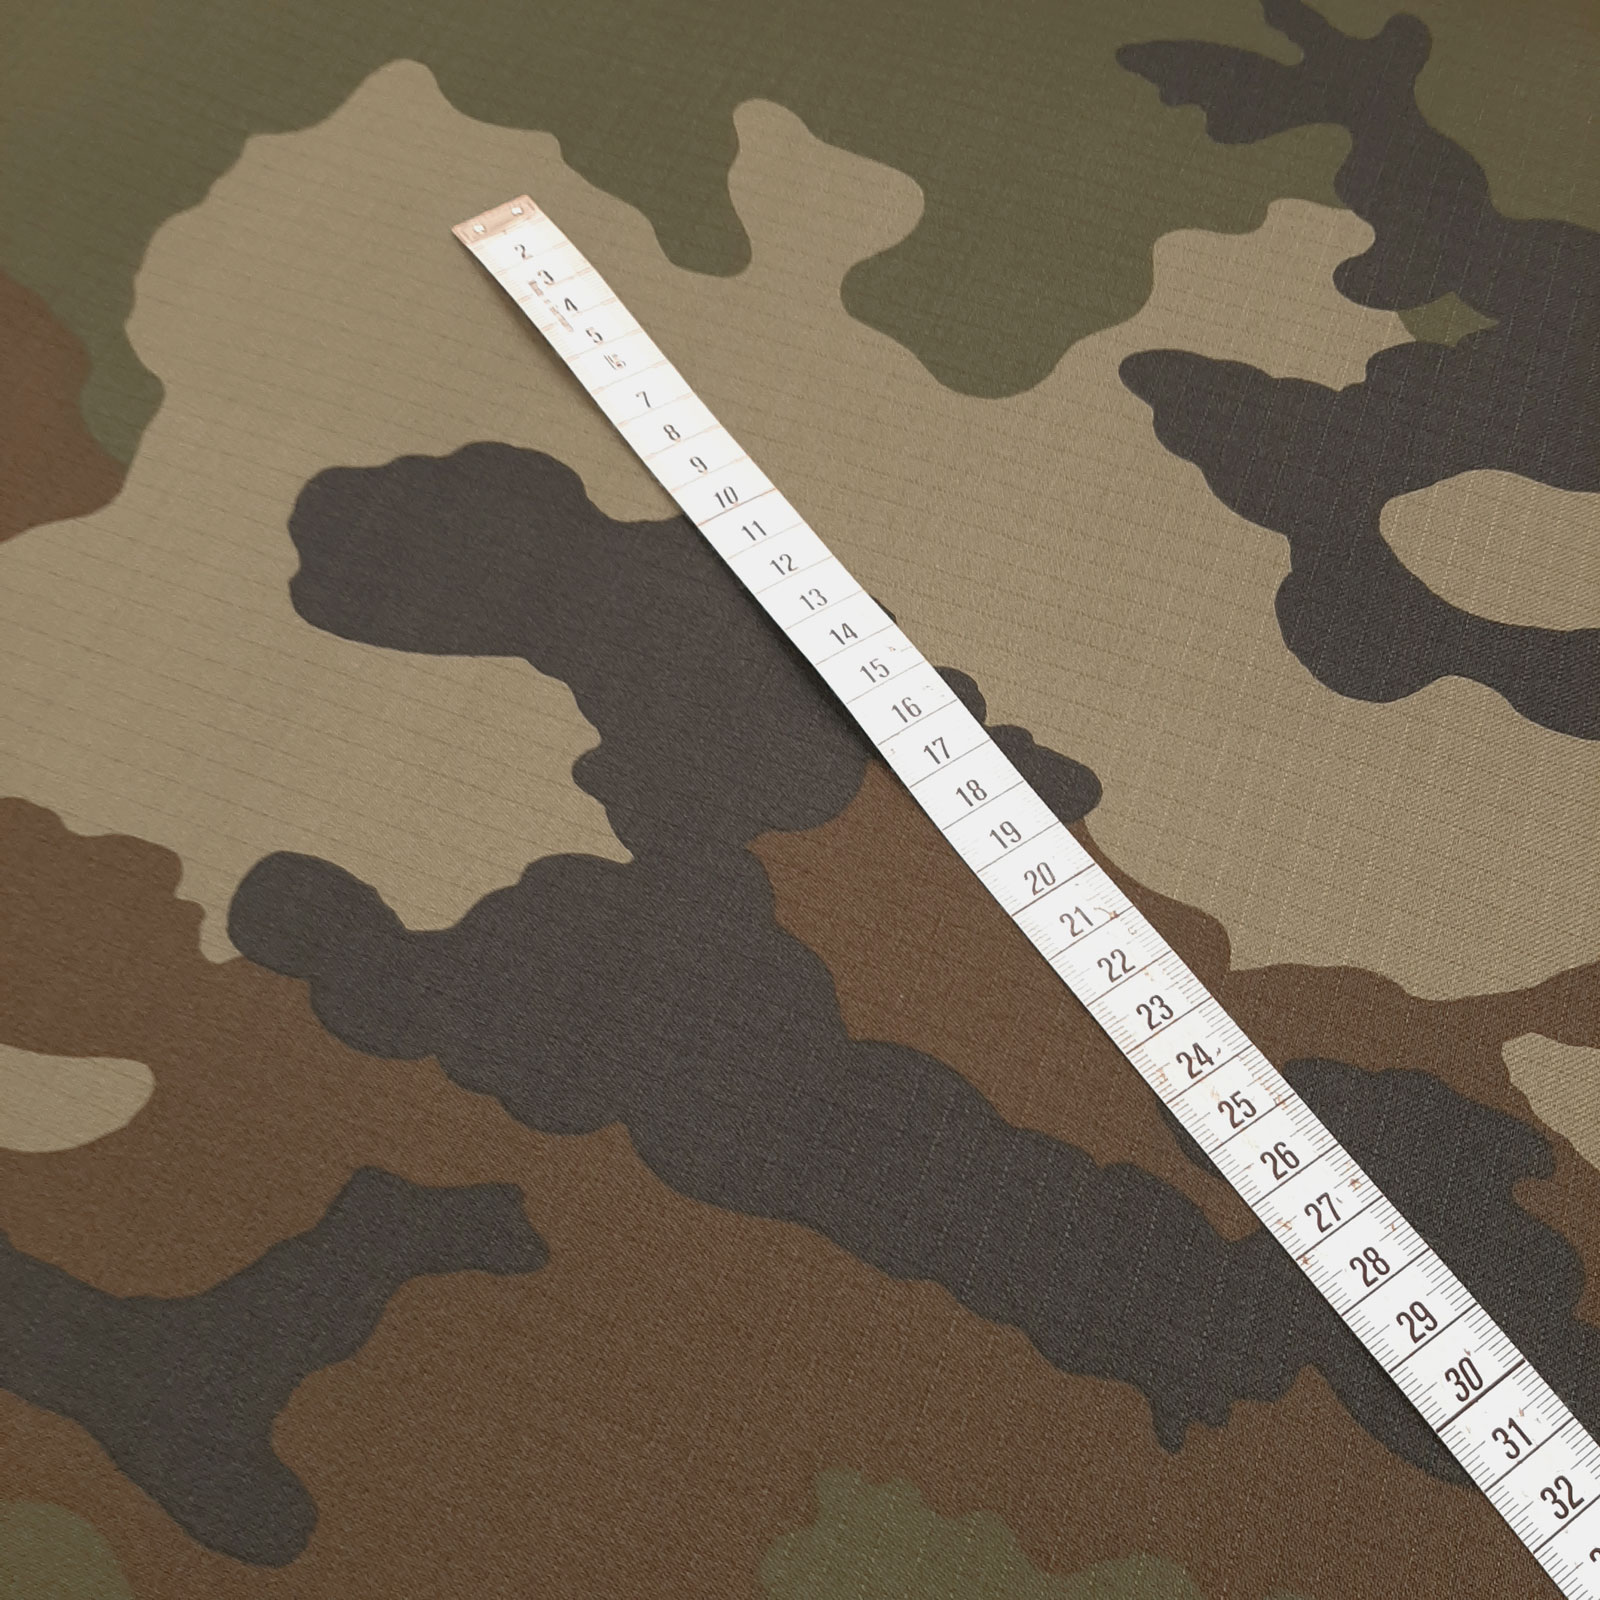 Aramid France Camouflage - Ripstop Camouflage Print with UPF 50+